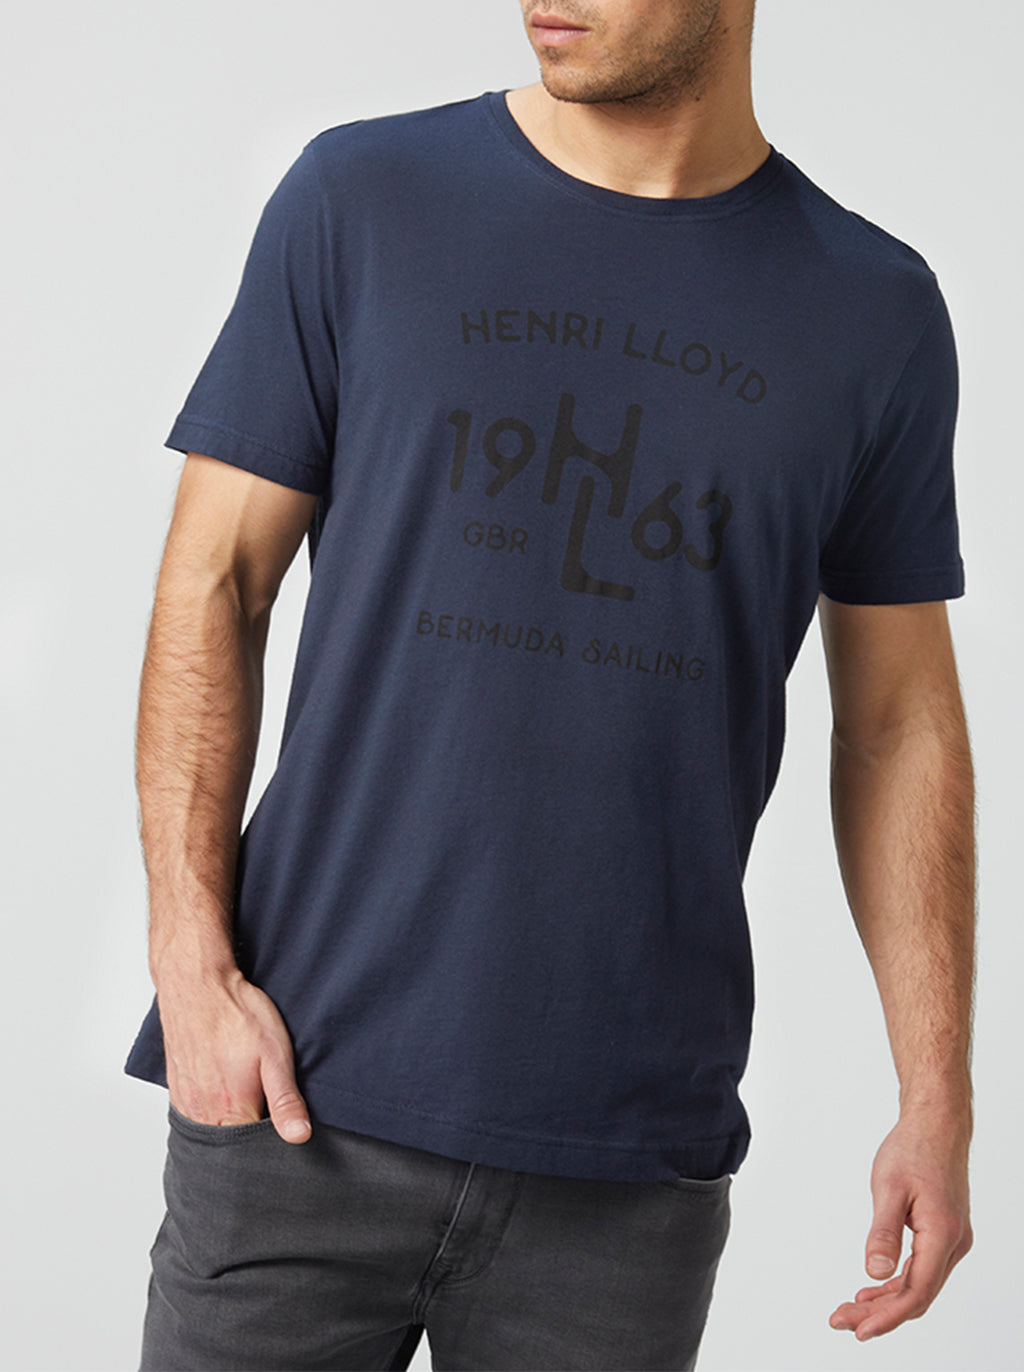 Henri Lloyd Penfro Lightweight Enzyme Tee NAV - ONLY SIZE SMALL LEFT DISCONTINUED STYLE